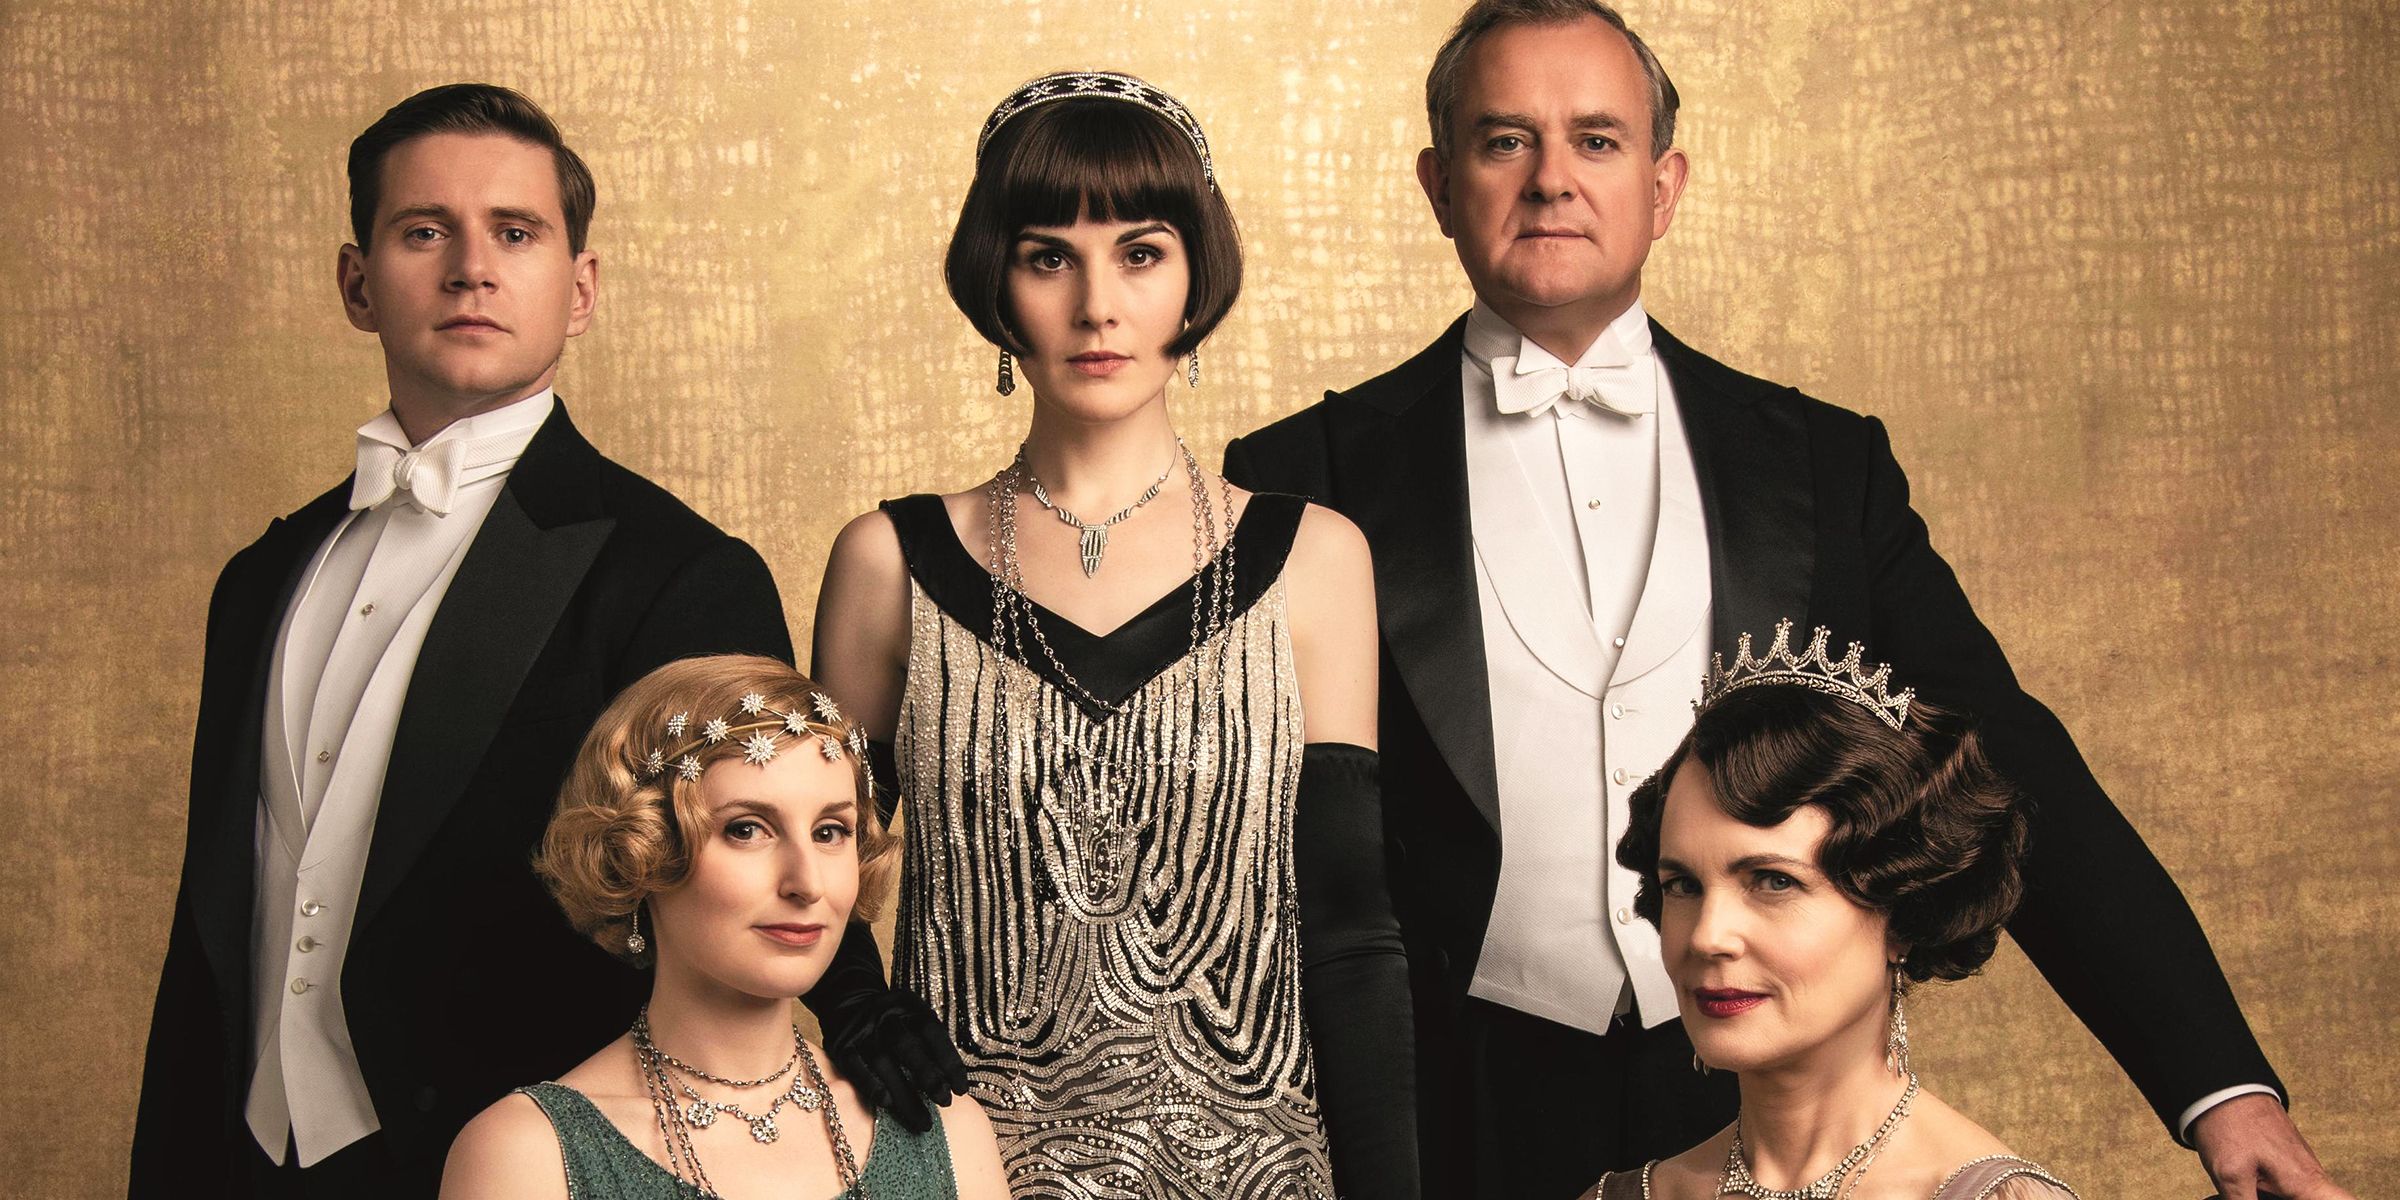 10 Things We Want To See In The New Downton Abbey Movie